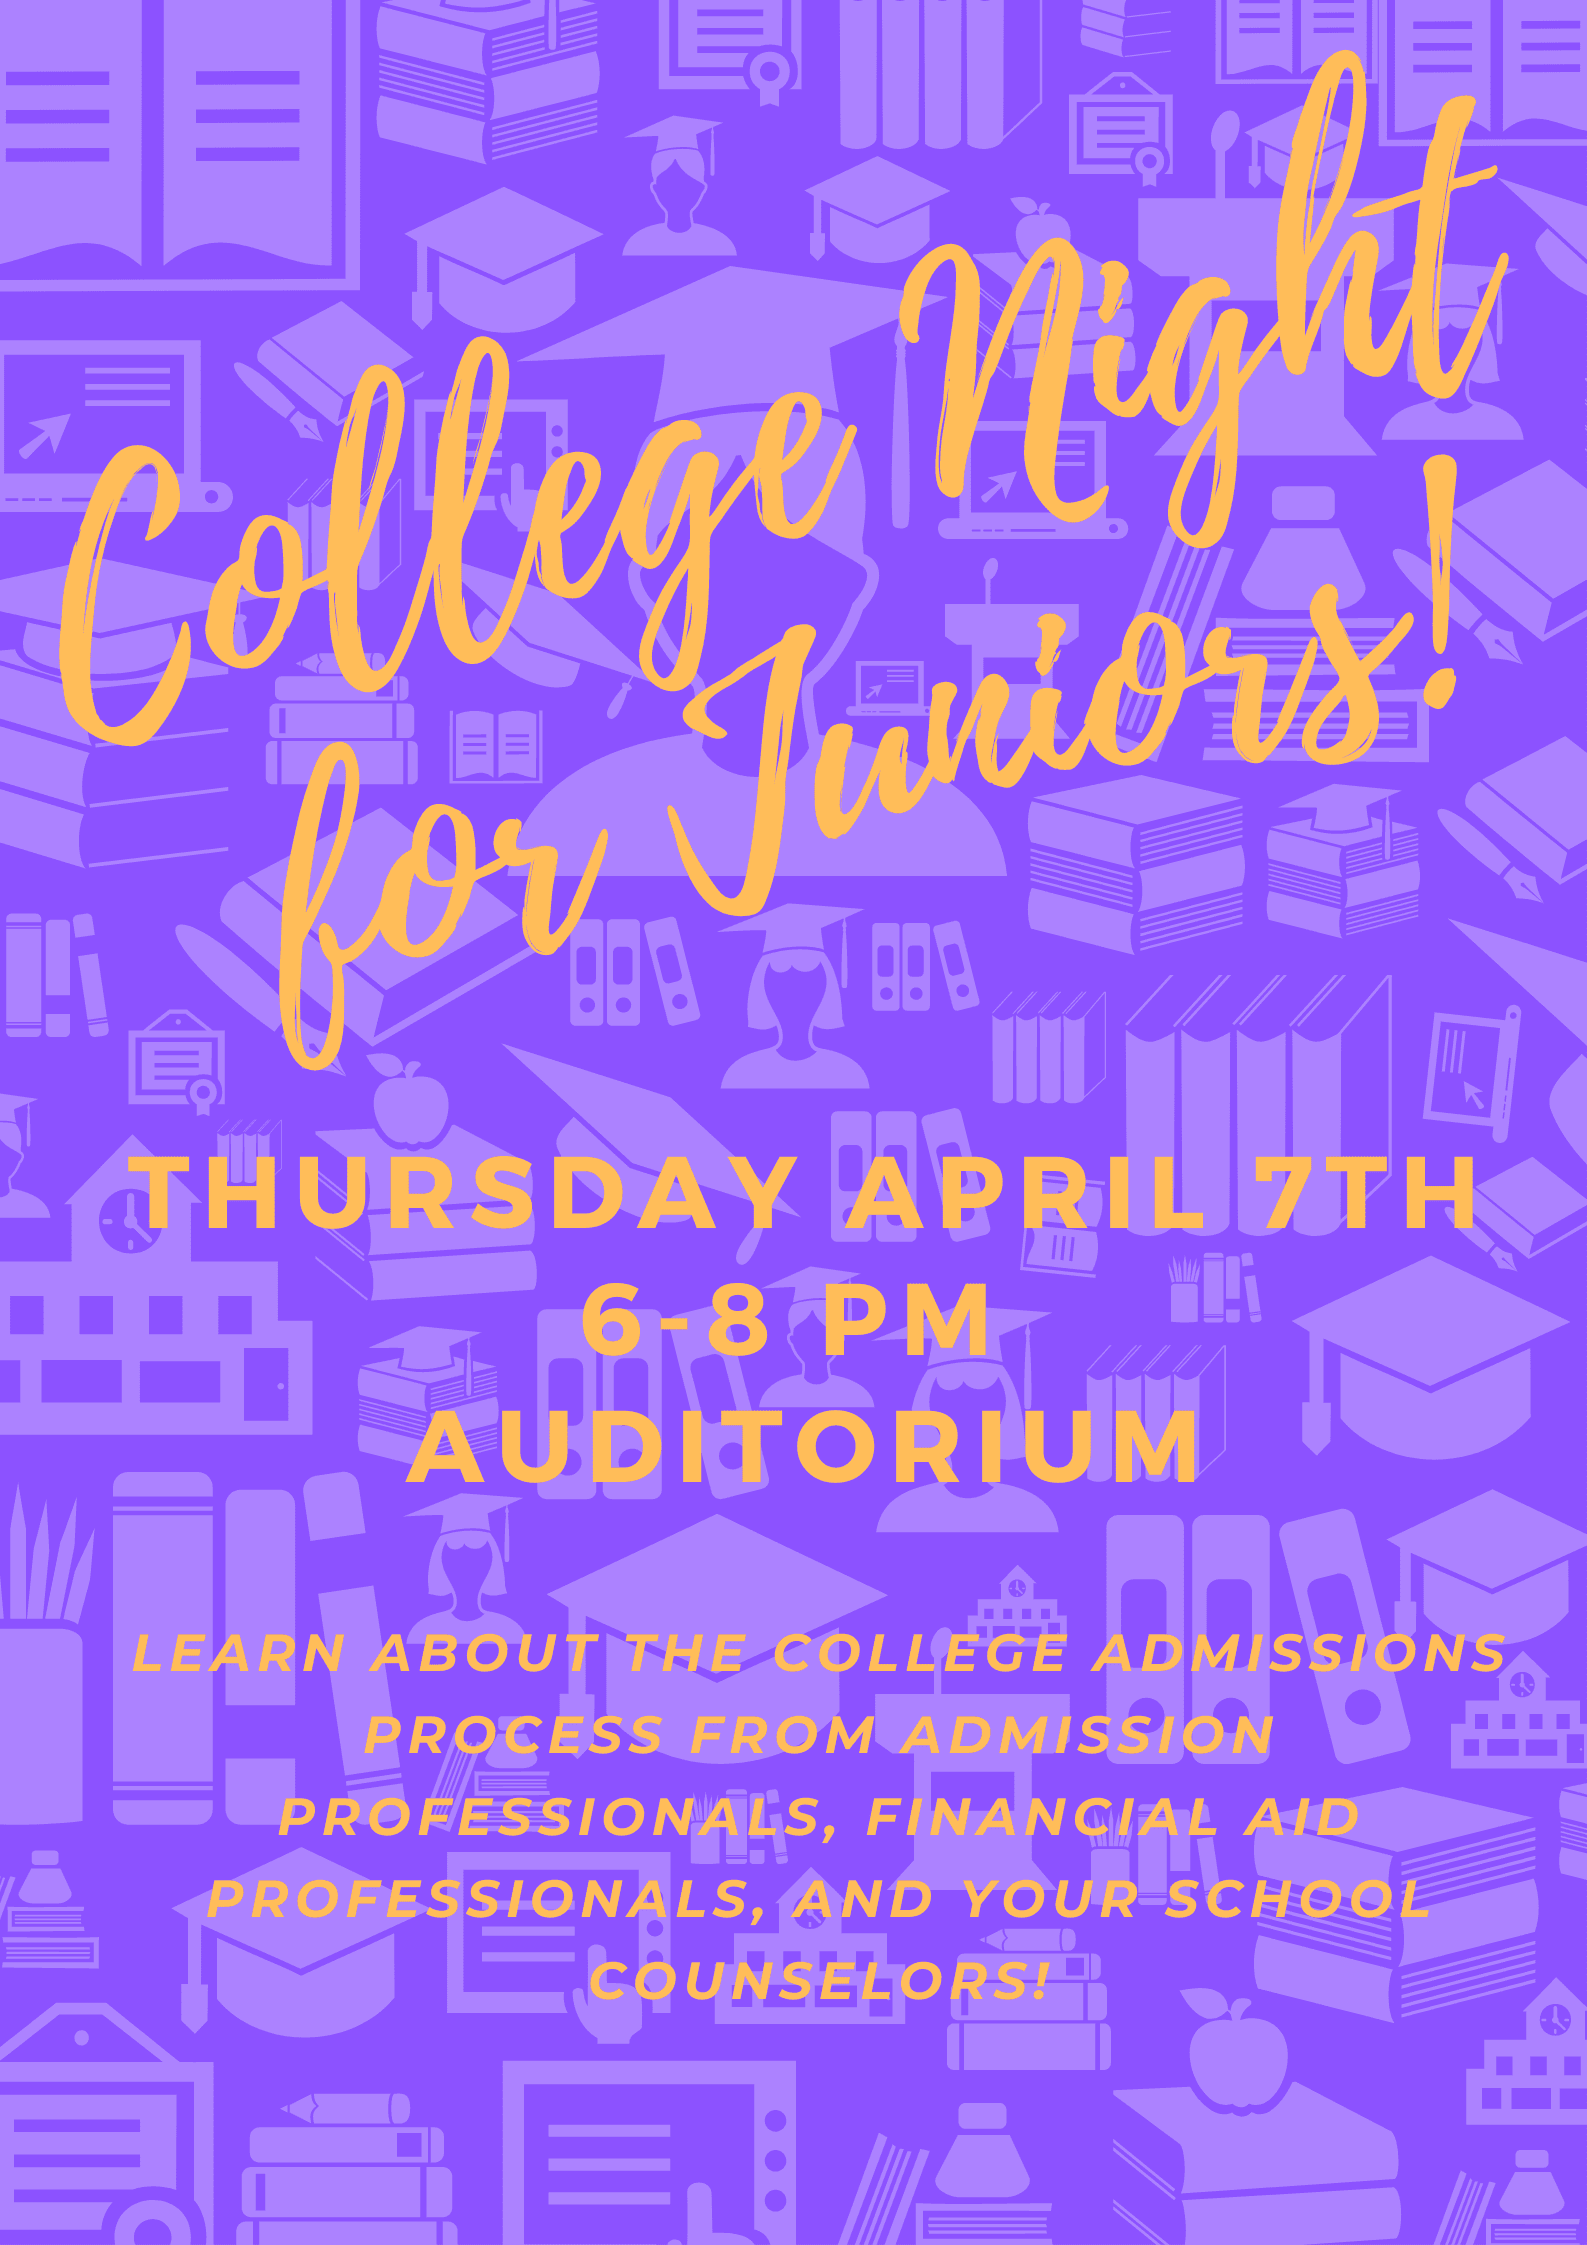 College Night for juniors! Thursday April 7, 6-8 pm auditorium. Lern about the college admissions process from admission professionals, financial aid professionals and your school counselors.